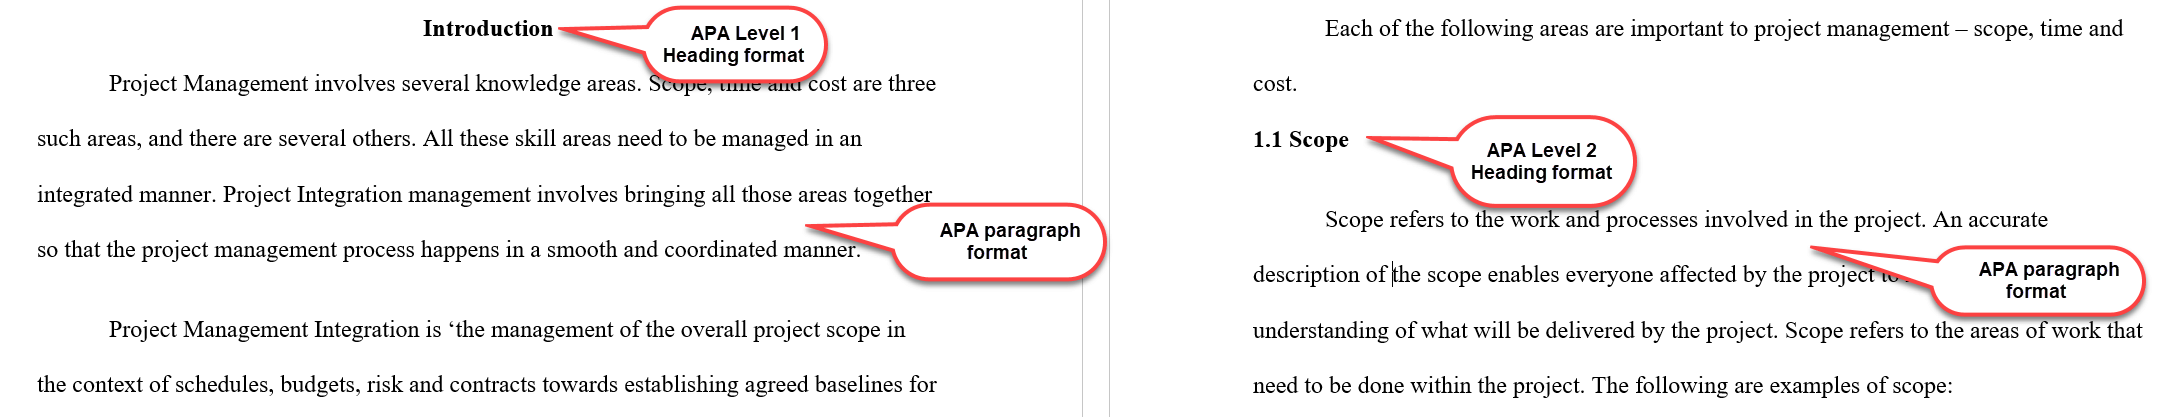 Example of a paragraph in APA format